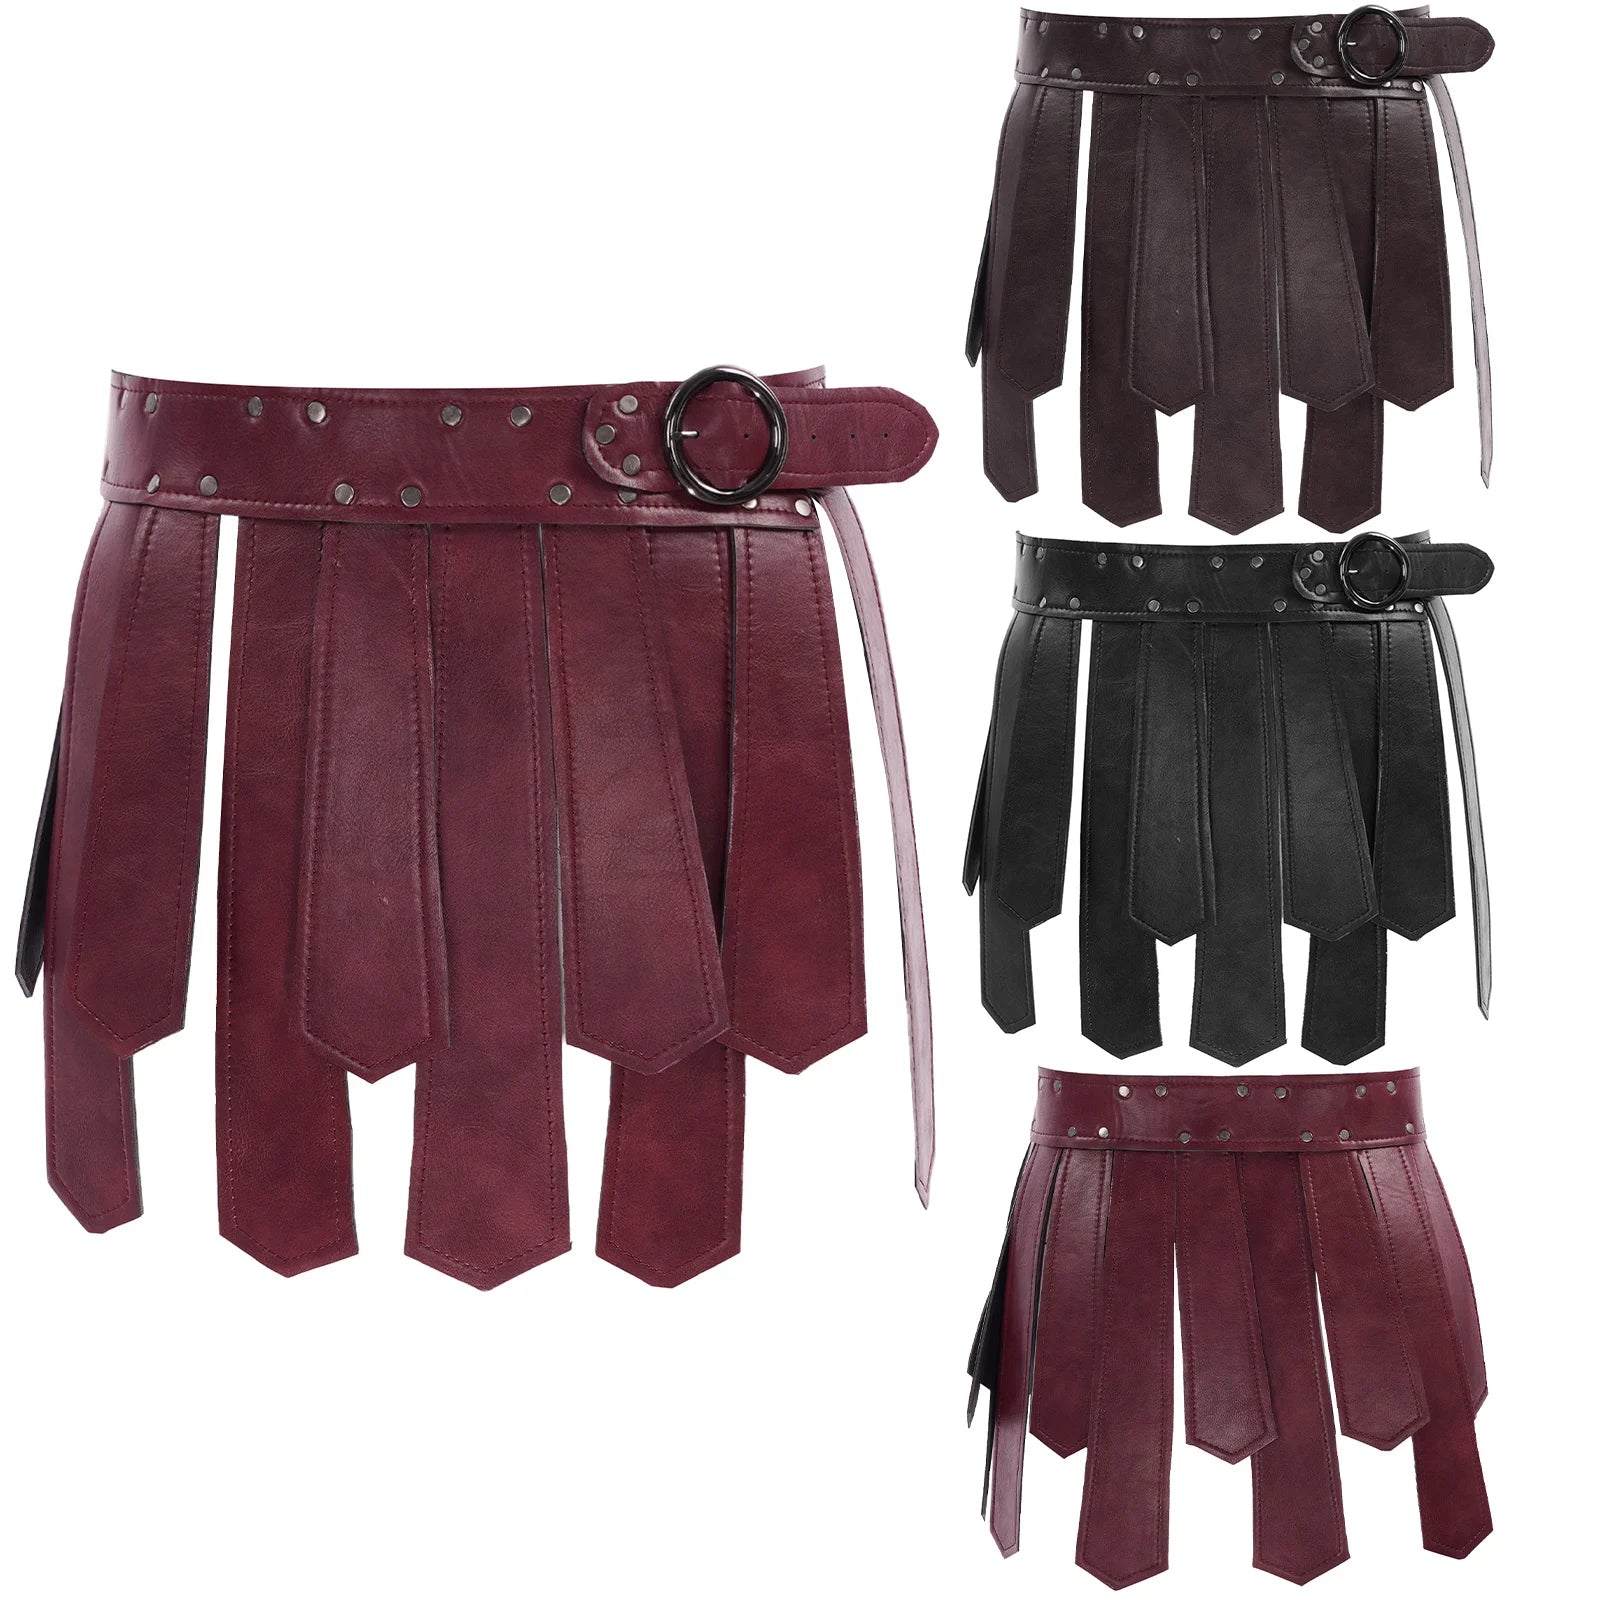 Four Maramalive™ Ancient Greek Roman Gladiator Gothic Steampunk Belt Skirt Adult Men Halloween Carnival Party Cosplay Roman Soldier Costume with flared, tabard-like panels in dark red and black, reminiscent of a punk style skirt.